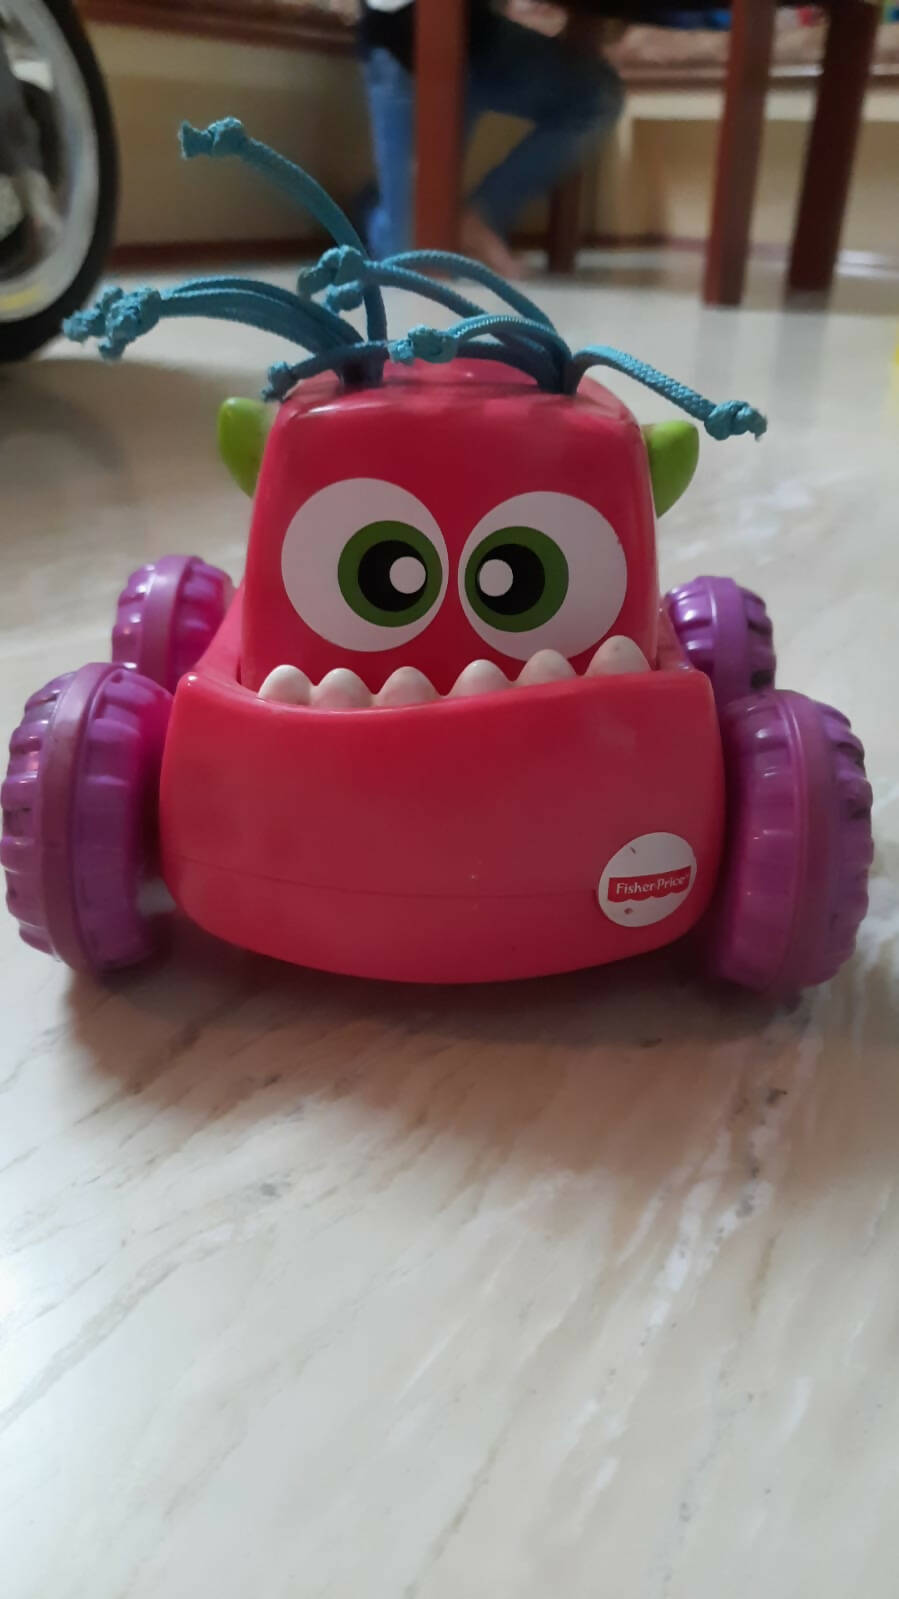 FISHER PRICE Push and Go toy